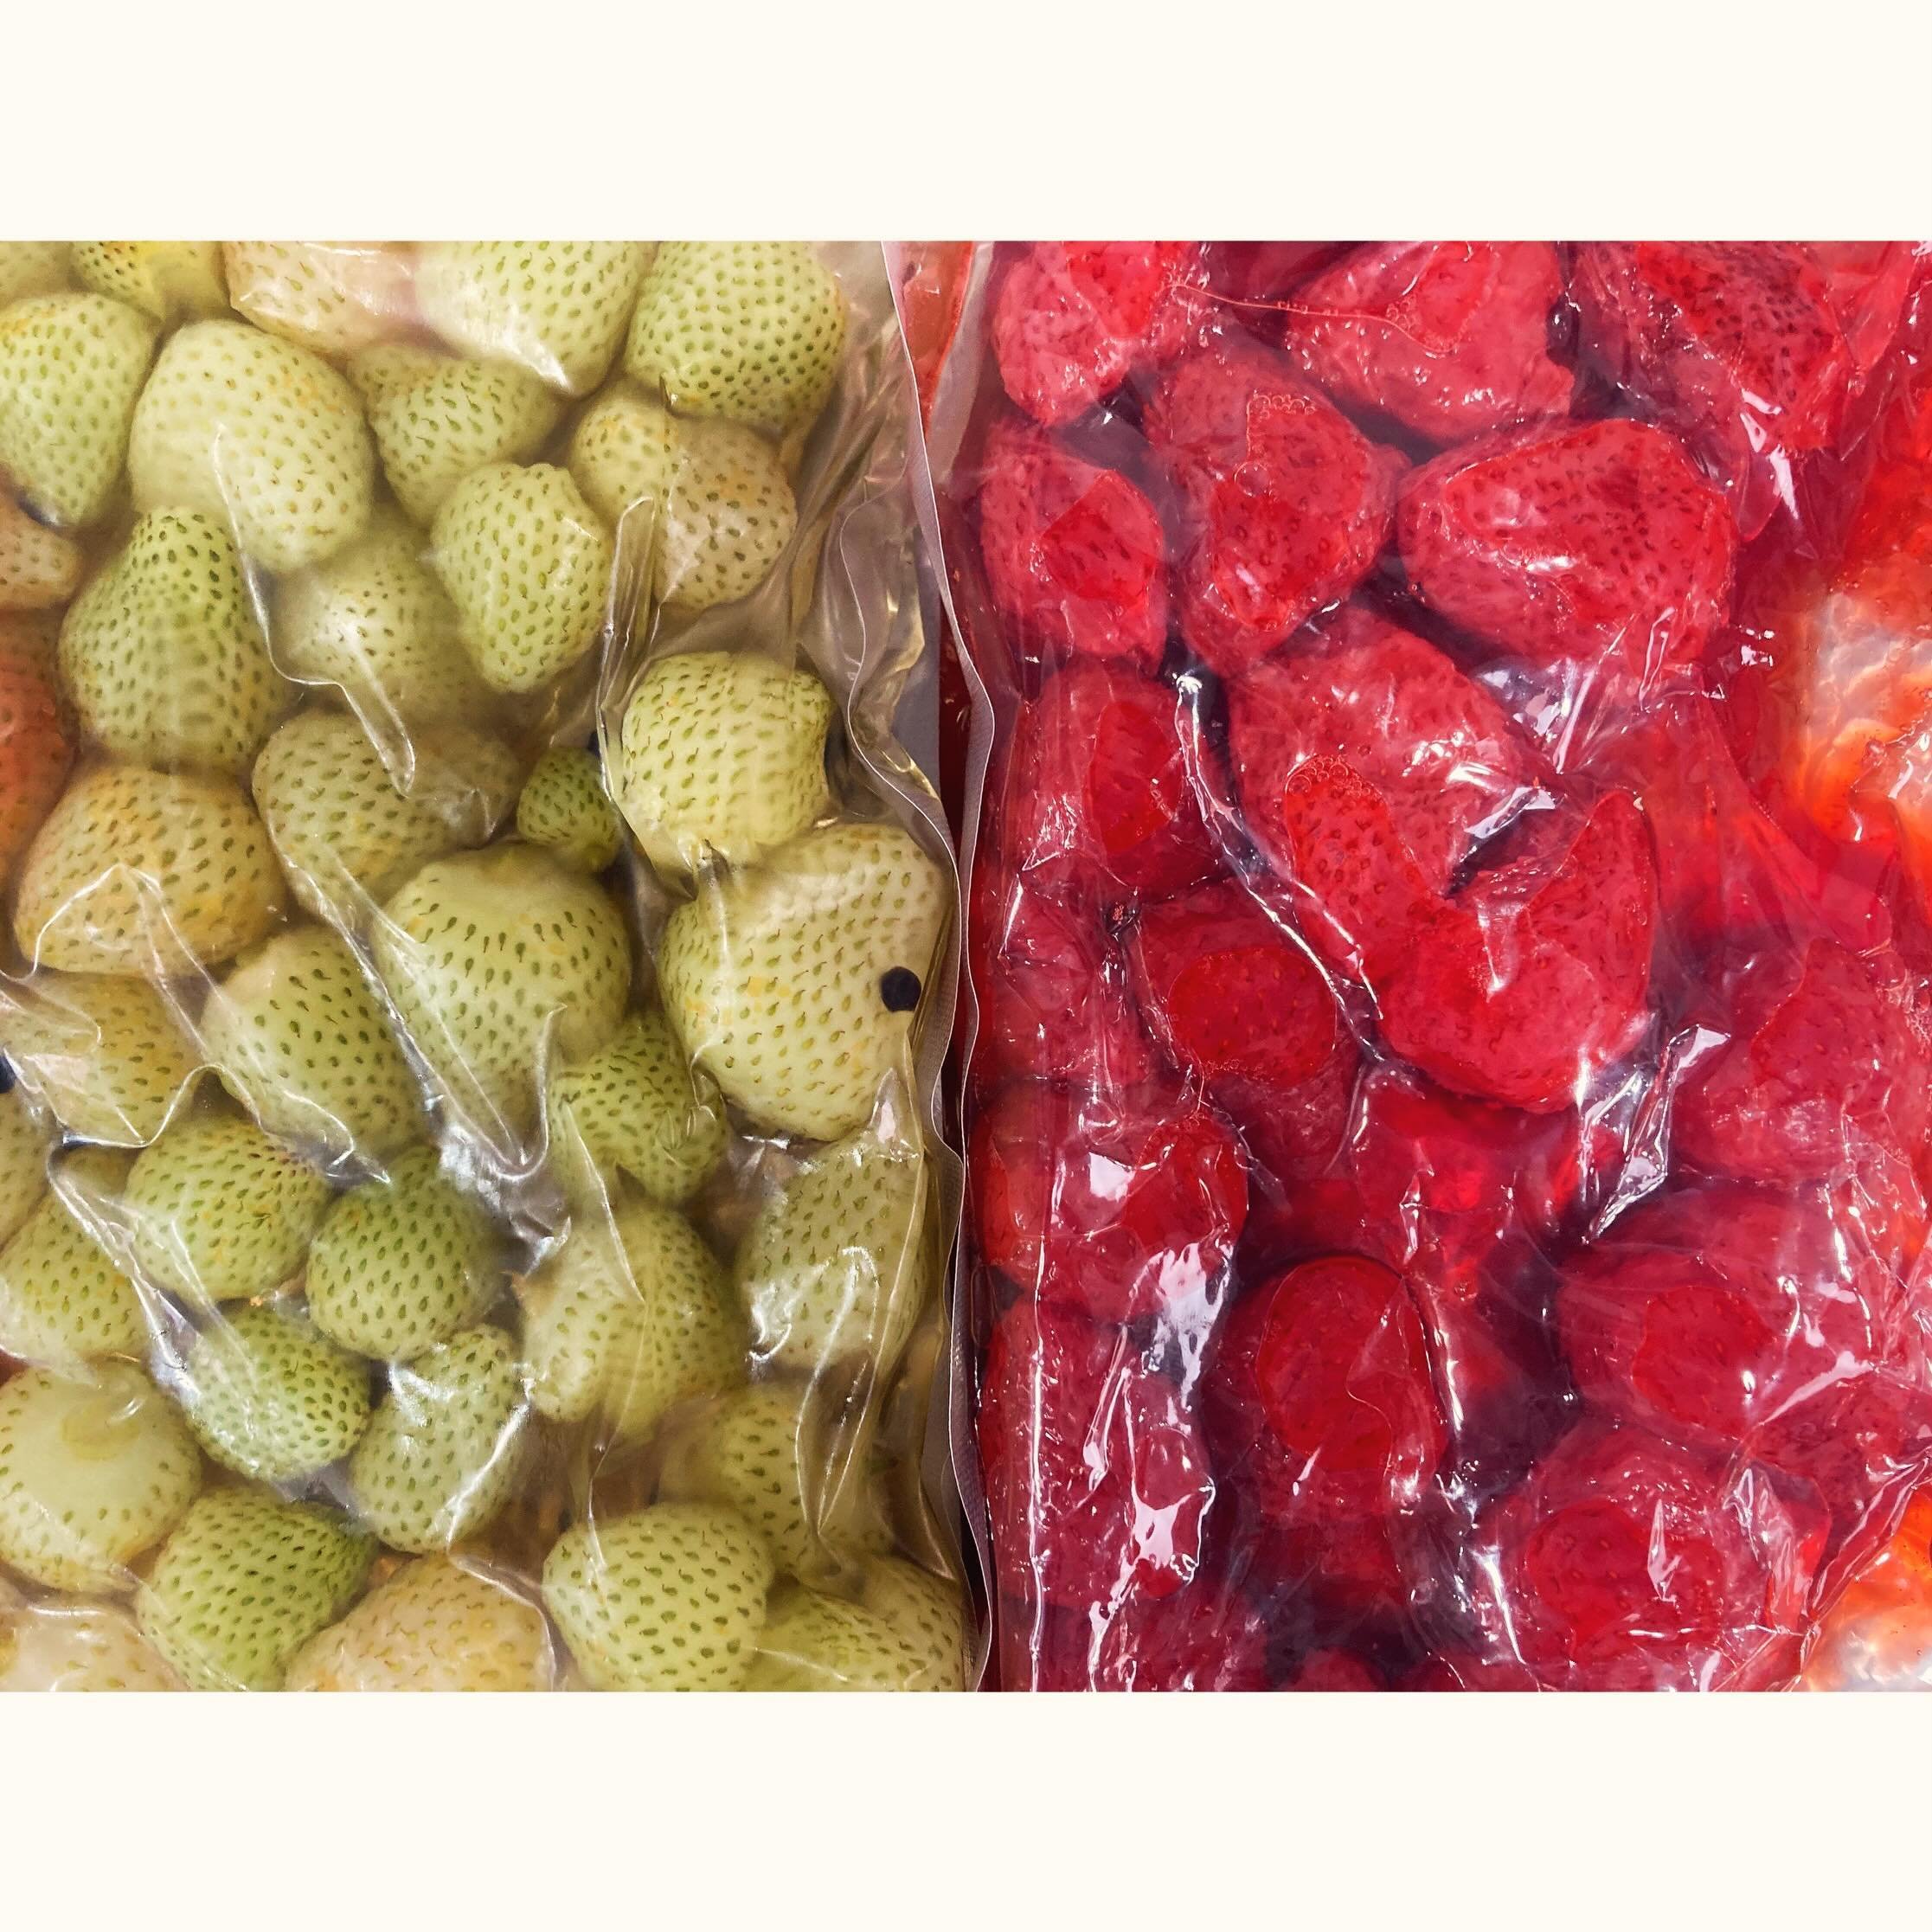 MAY - mixture of crushed fermented ripe strawberries and pickled green strawberries for our strawberry salad this week at mr ji courtesy of @flourishproduce